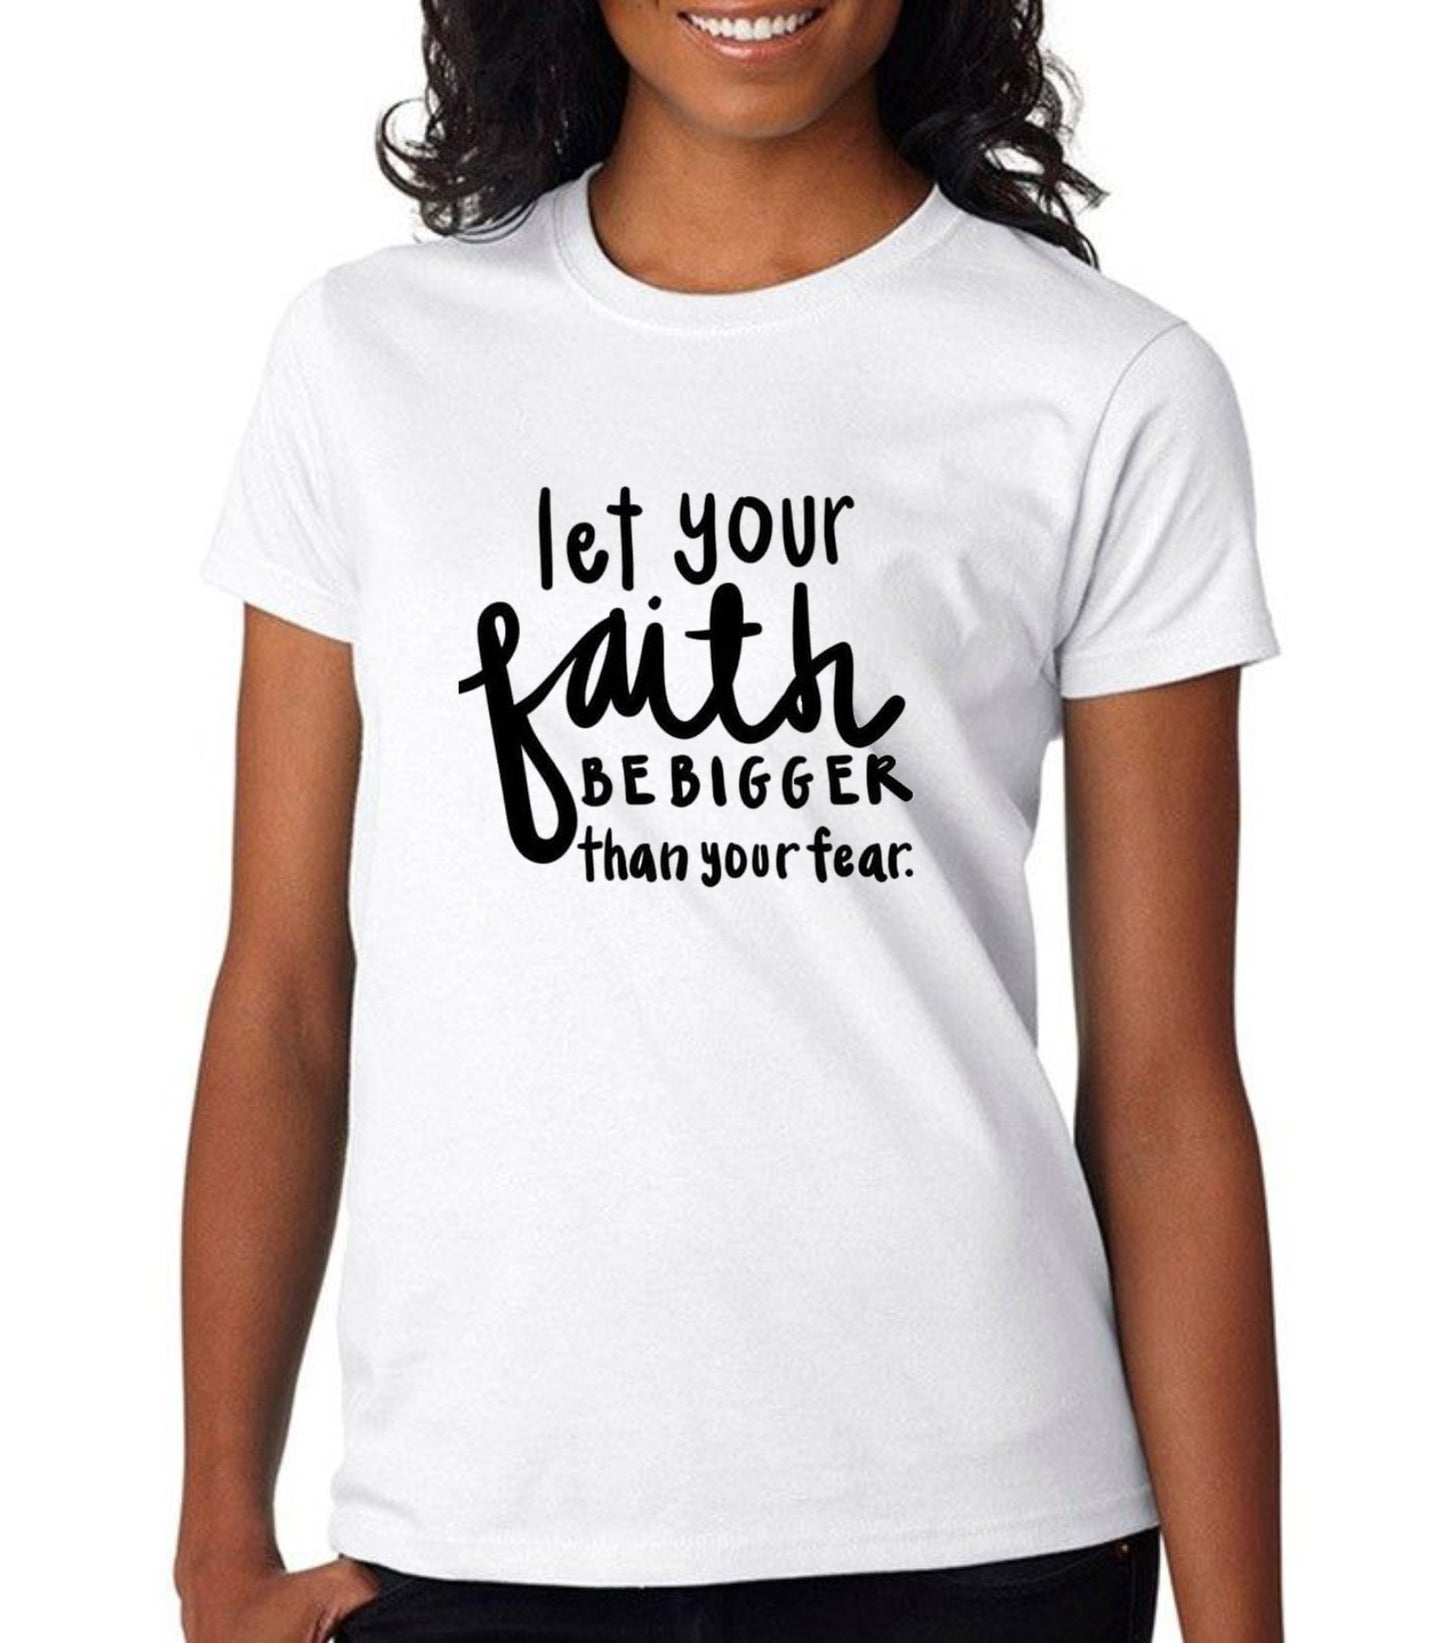 Your faith be bigger than your fear